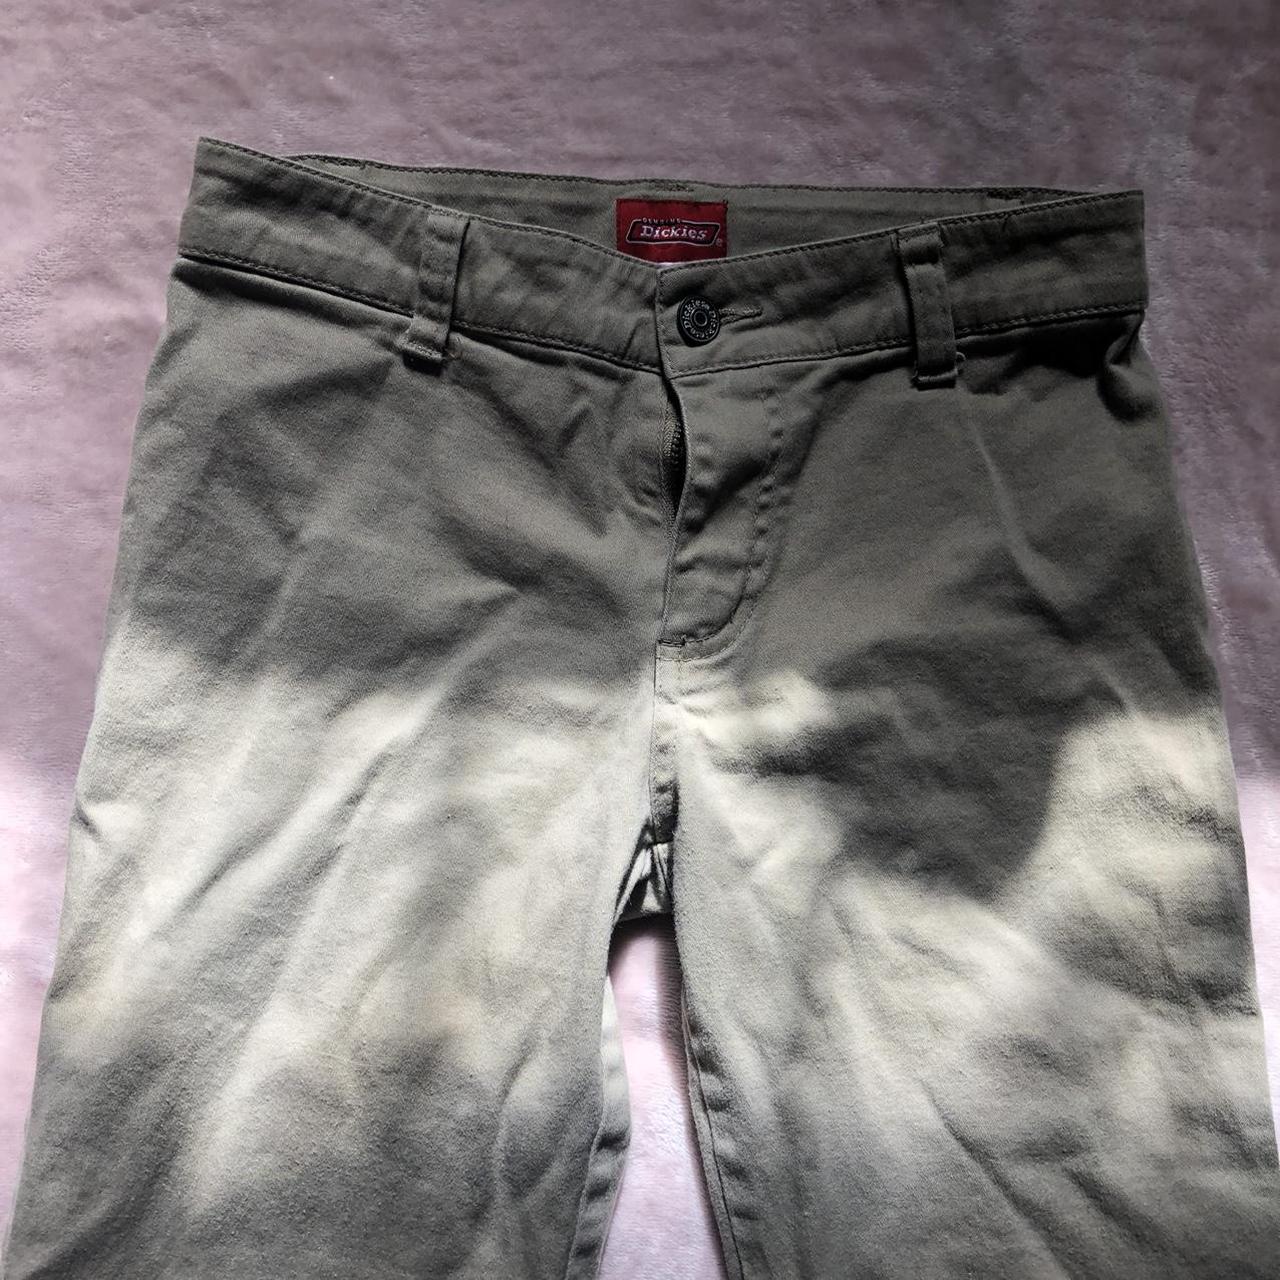 Dickies low rise straight leg pants in size 0 with... - Depop